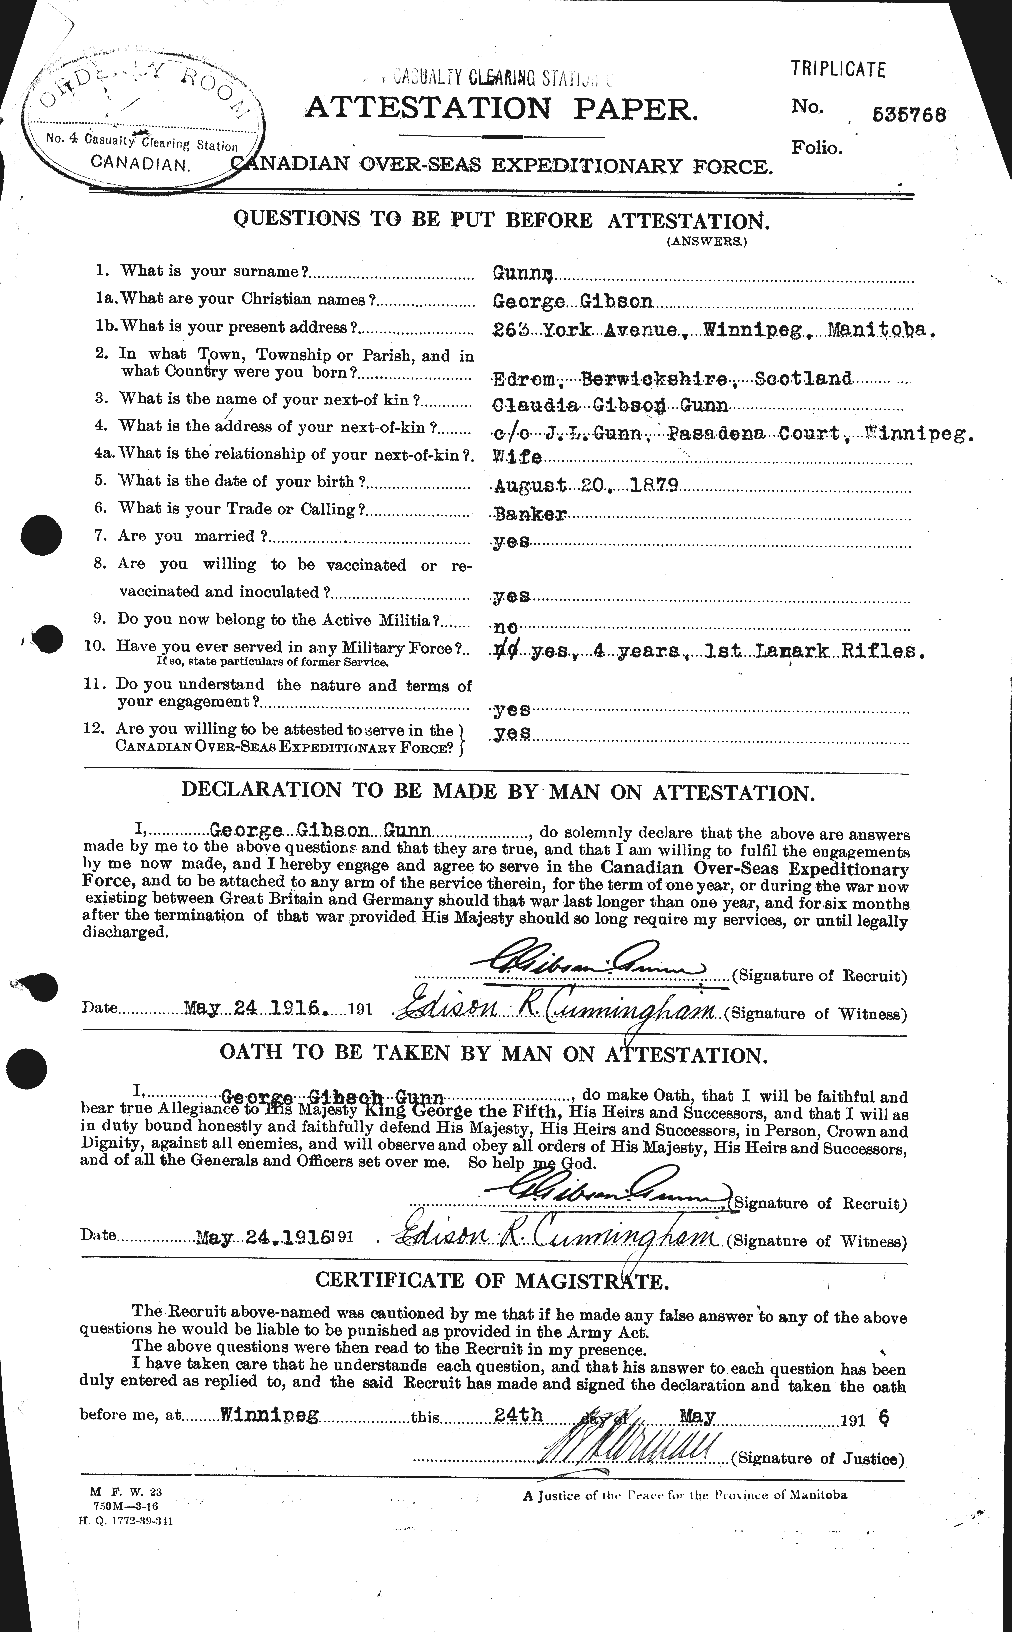 Personnel Records of the First World War - CEF 369243a